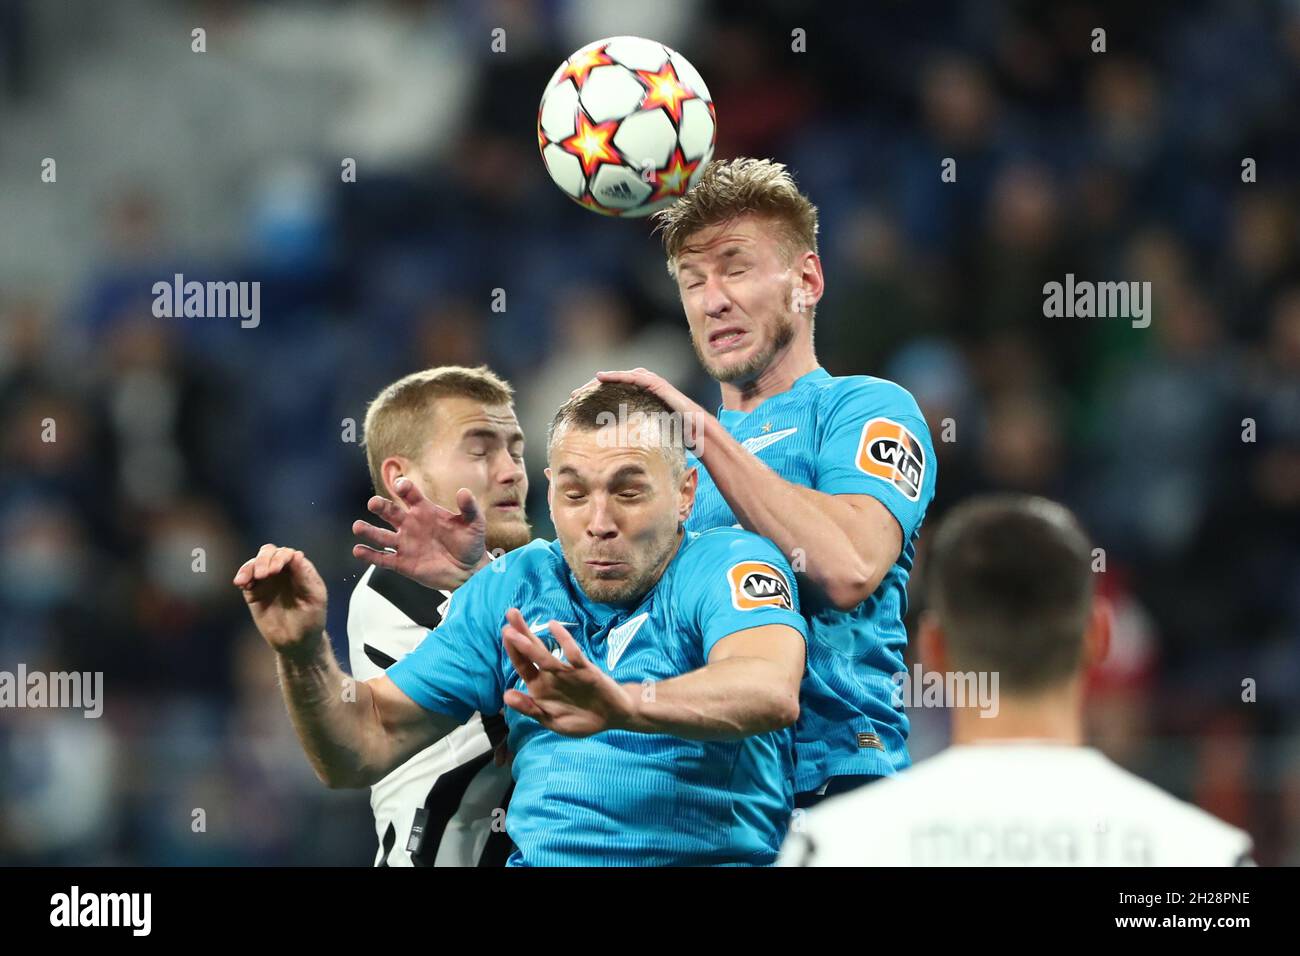 forward Artem Dzyuba of FC Zenit and defnder Dmitri Chistyakov of FC Zenit in action  during UEFA Champions League Group stage - Group H match FC Zenit v FC Juventus at Gazprom Arena in Saint Petersburg. SAINT PETERSBURG,  - OCTOBER 20: (Photo by Anatoliy Medved) Stock Photo